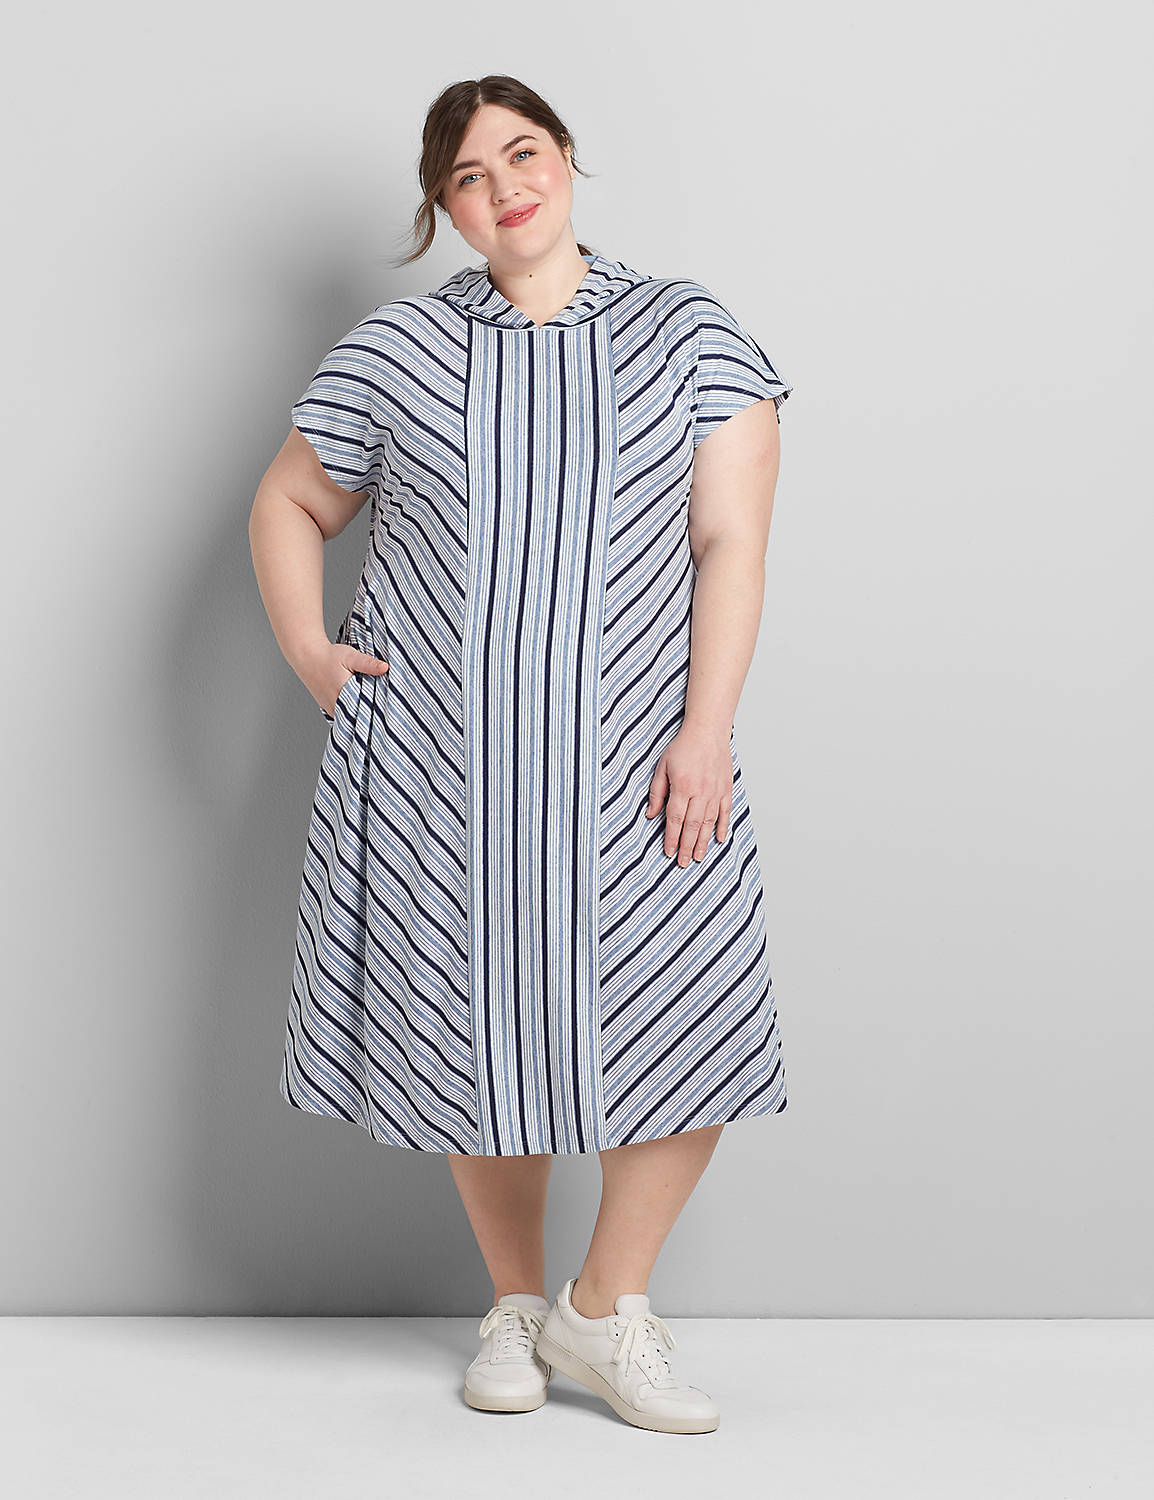 LIVI Striped Hooded Dress Product Image 1